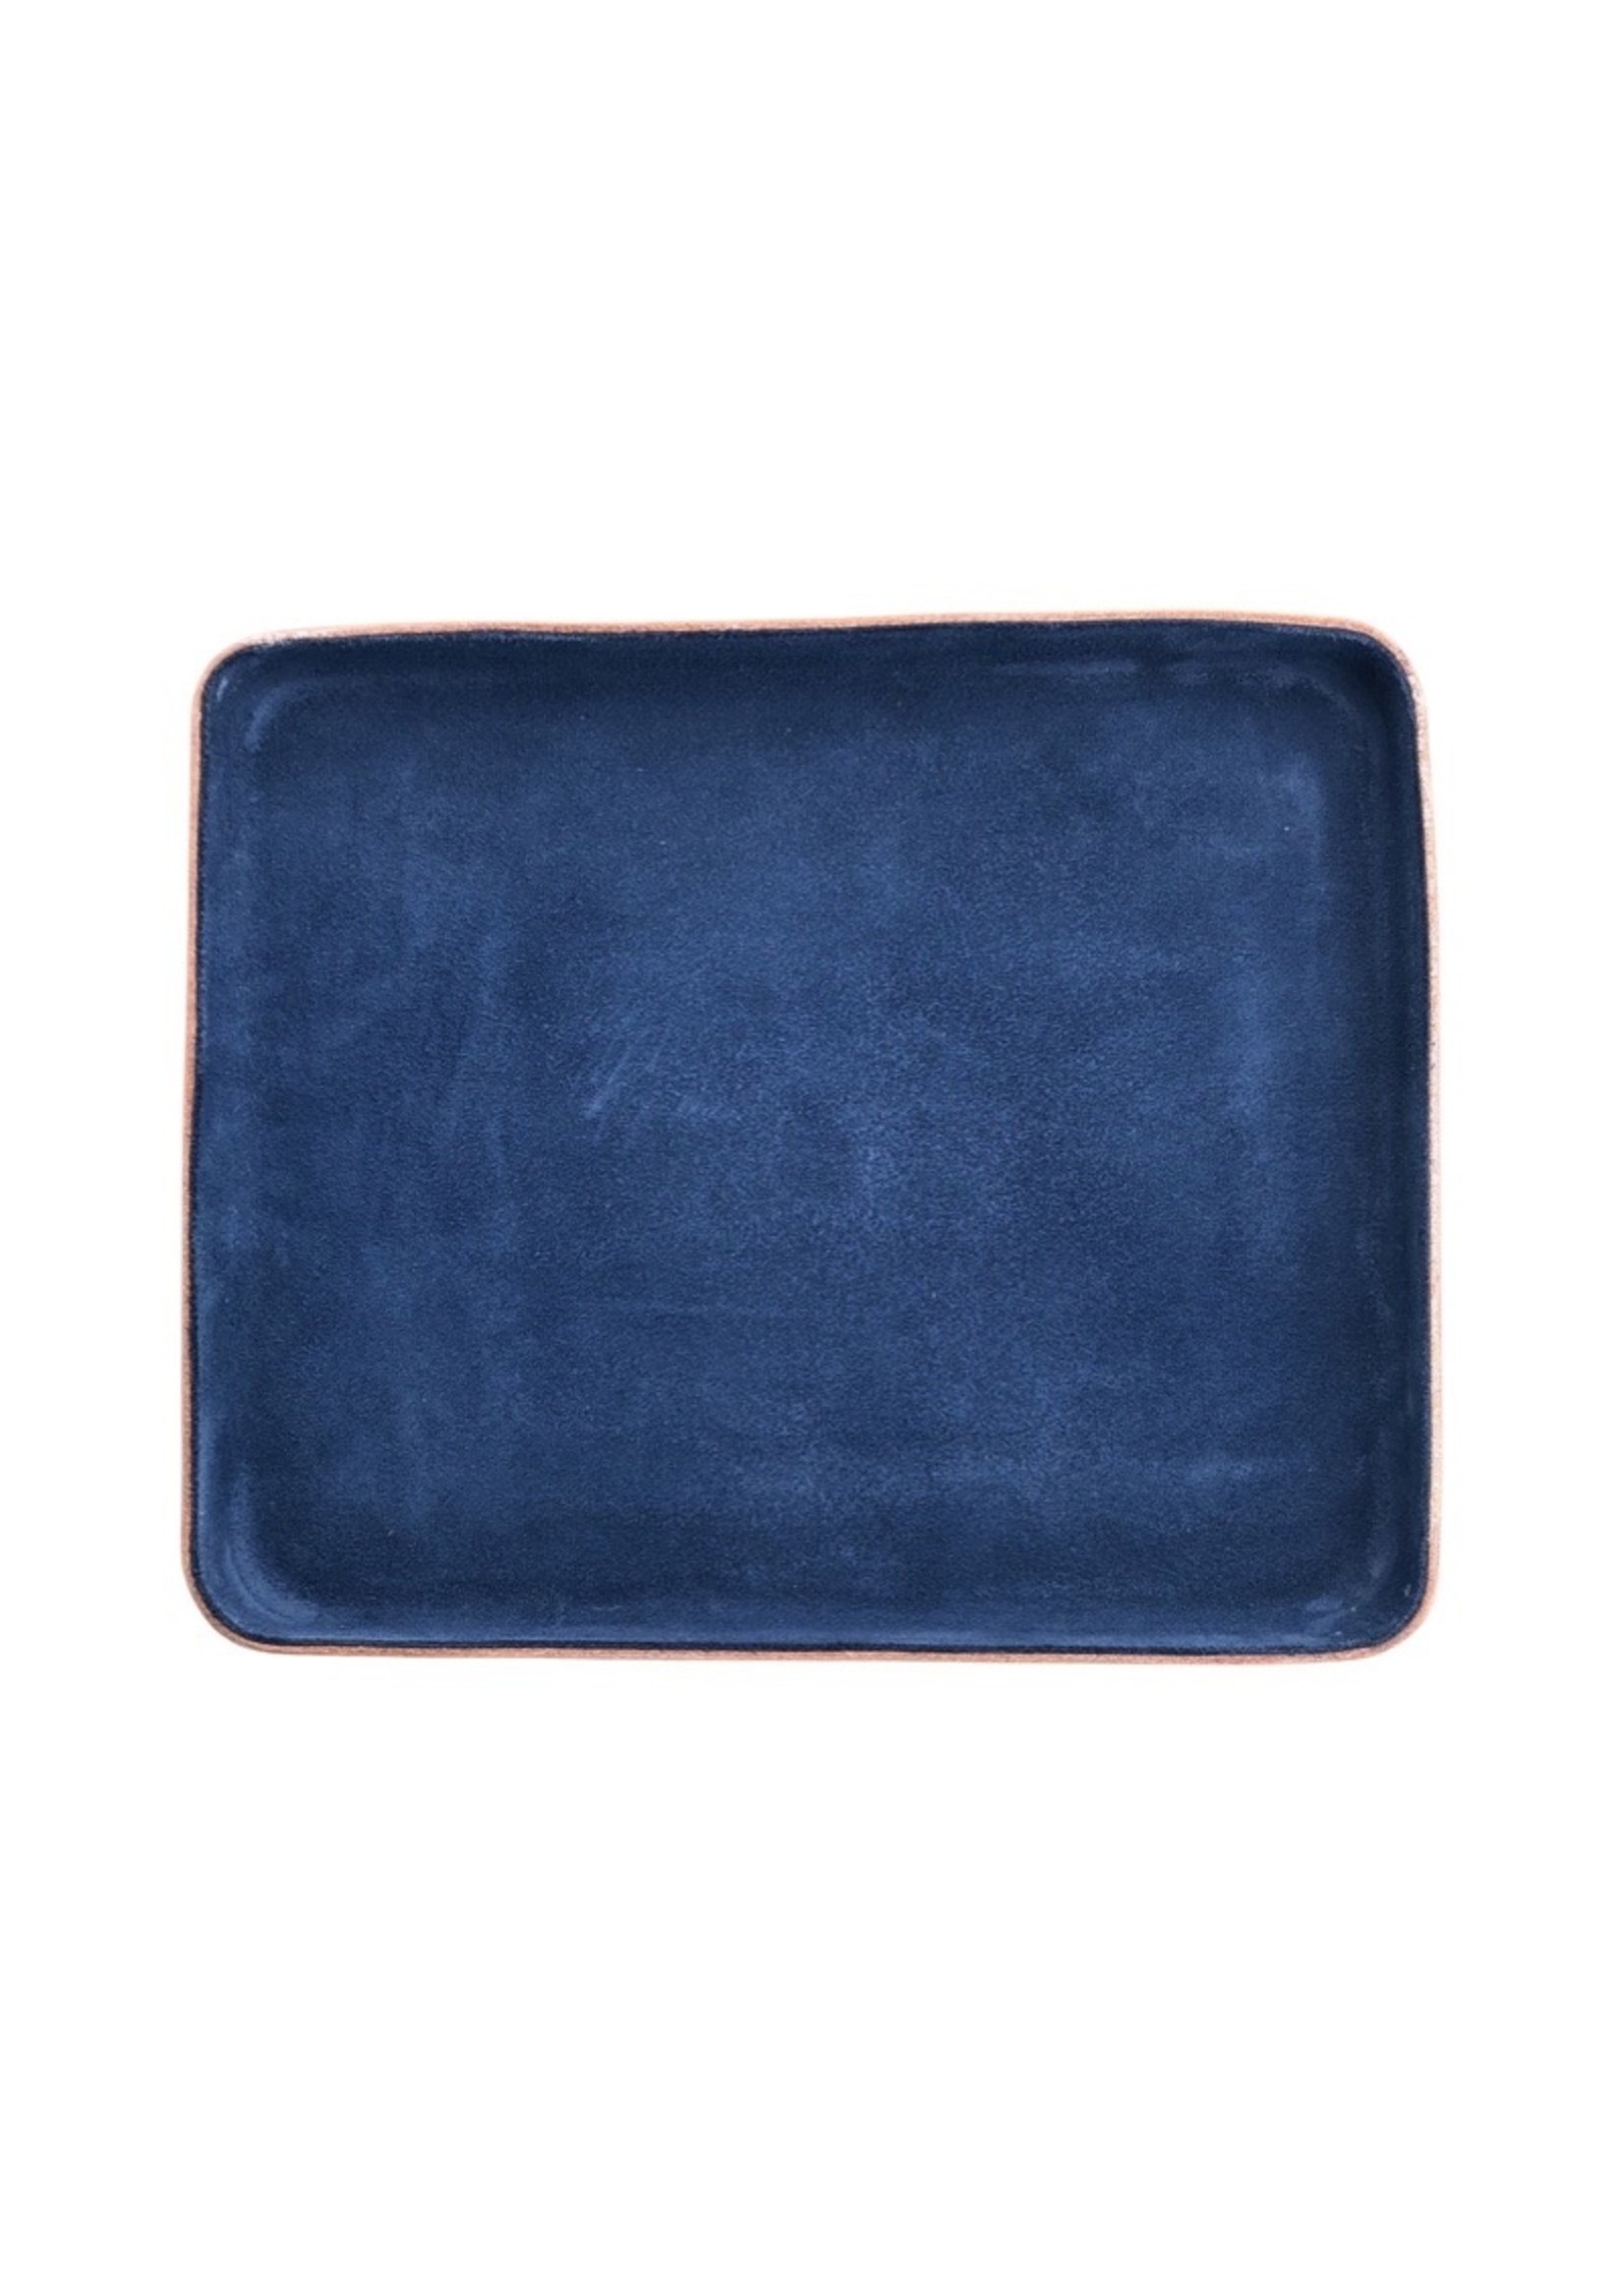 BAR W.R. SUEDED LEATHER TRAY LARGE